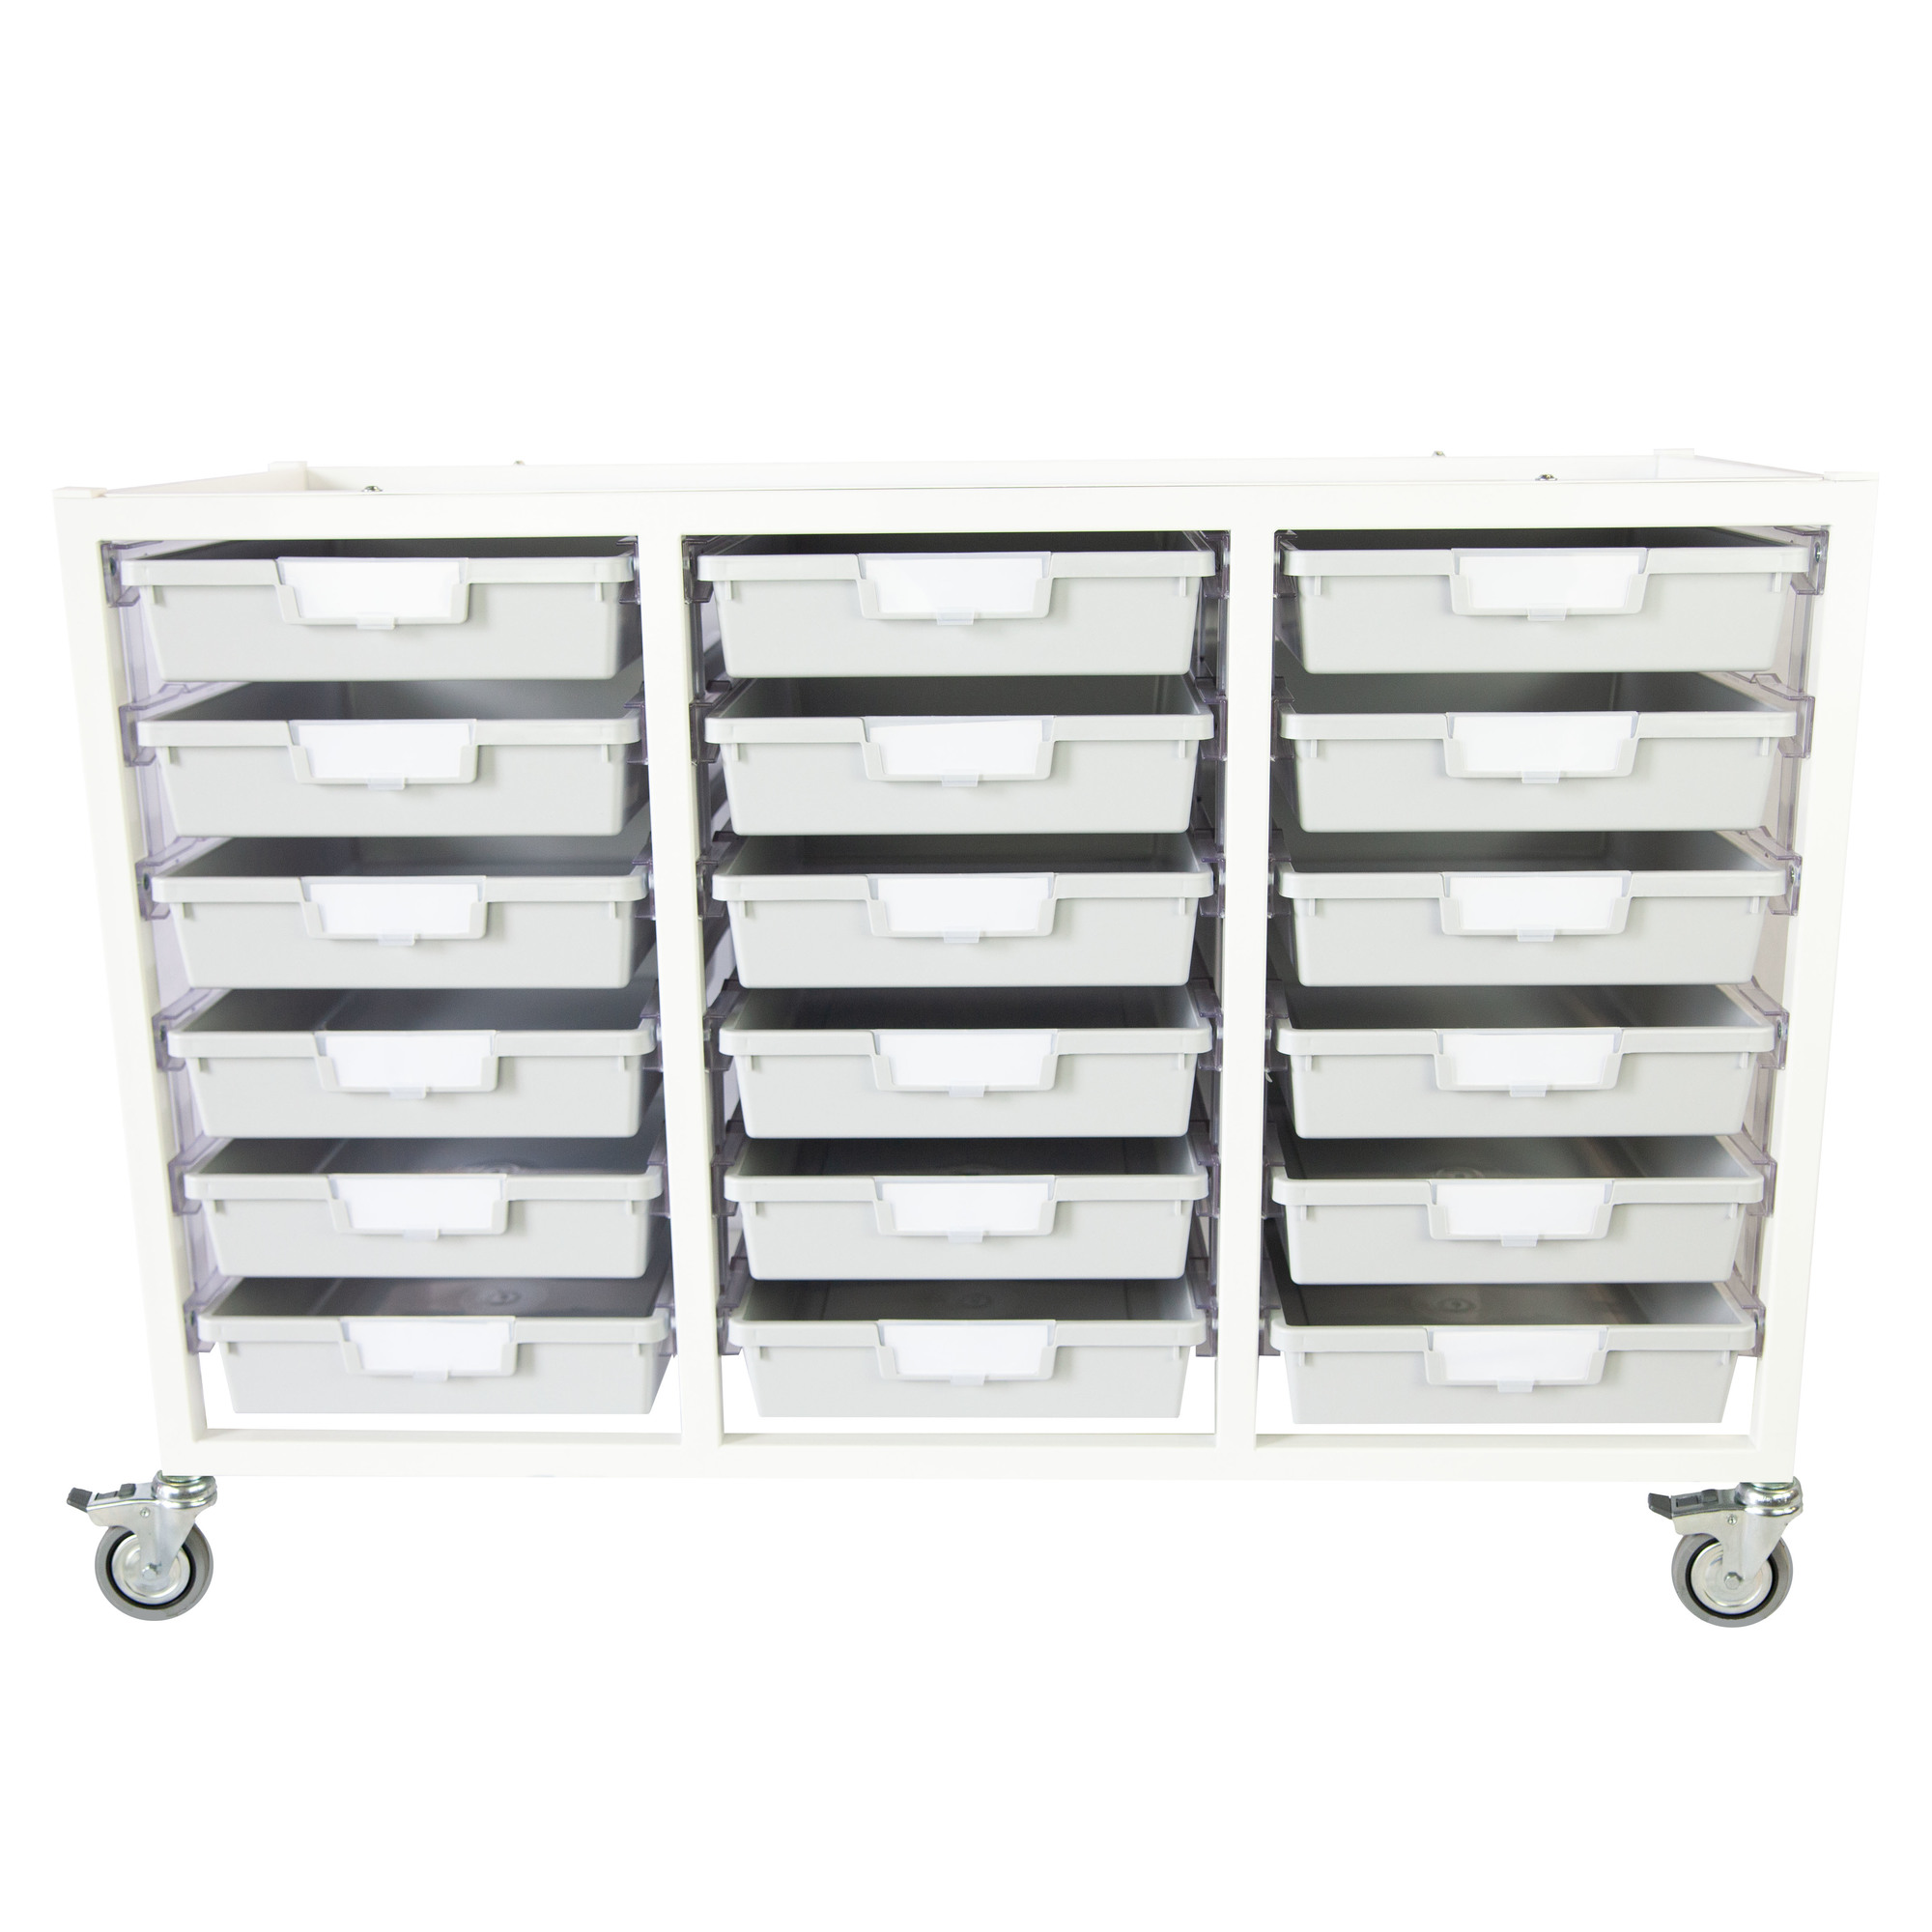 Certwood, Swift Cart Slim-White with 18 Gray Trays, Included (qty.) 1, Material Steel, Height 43.5 in, Model CE2106WH-18SLG